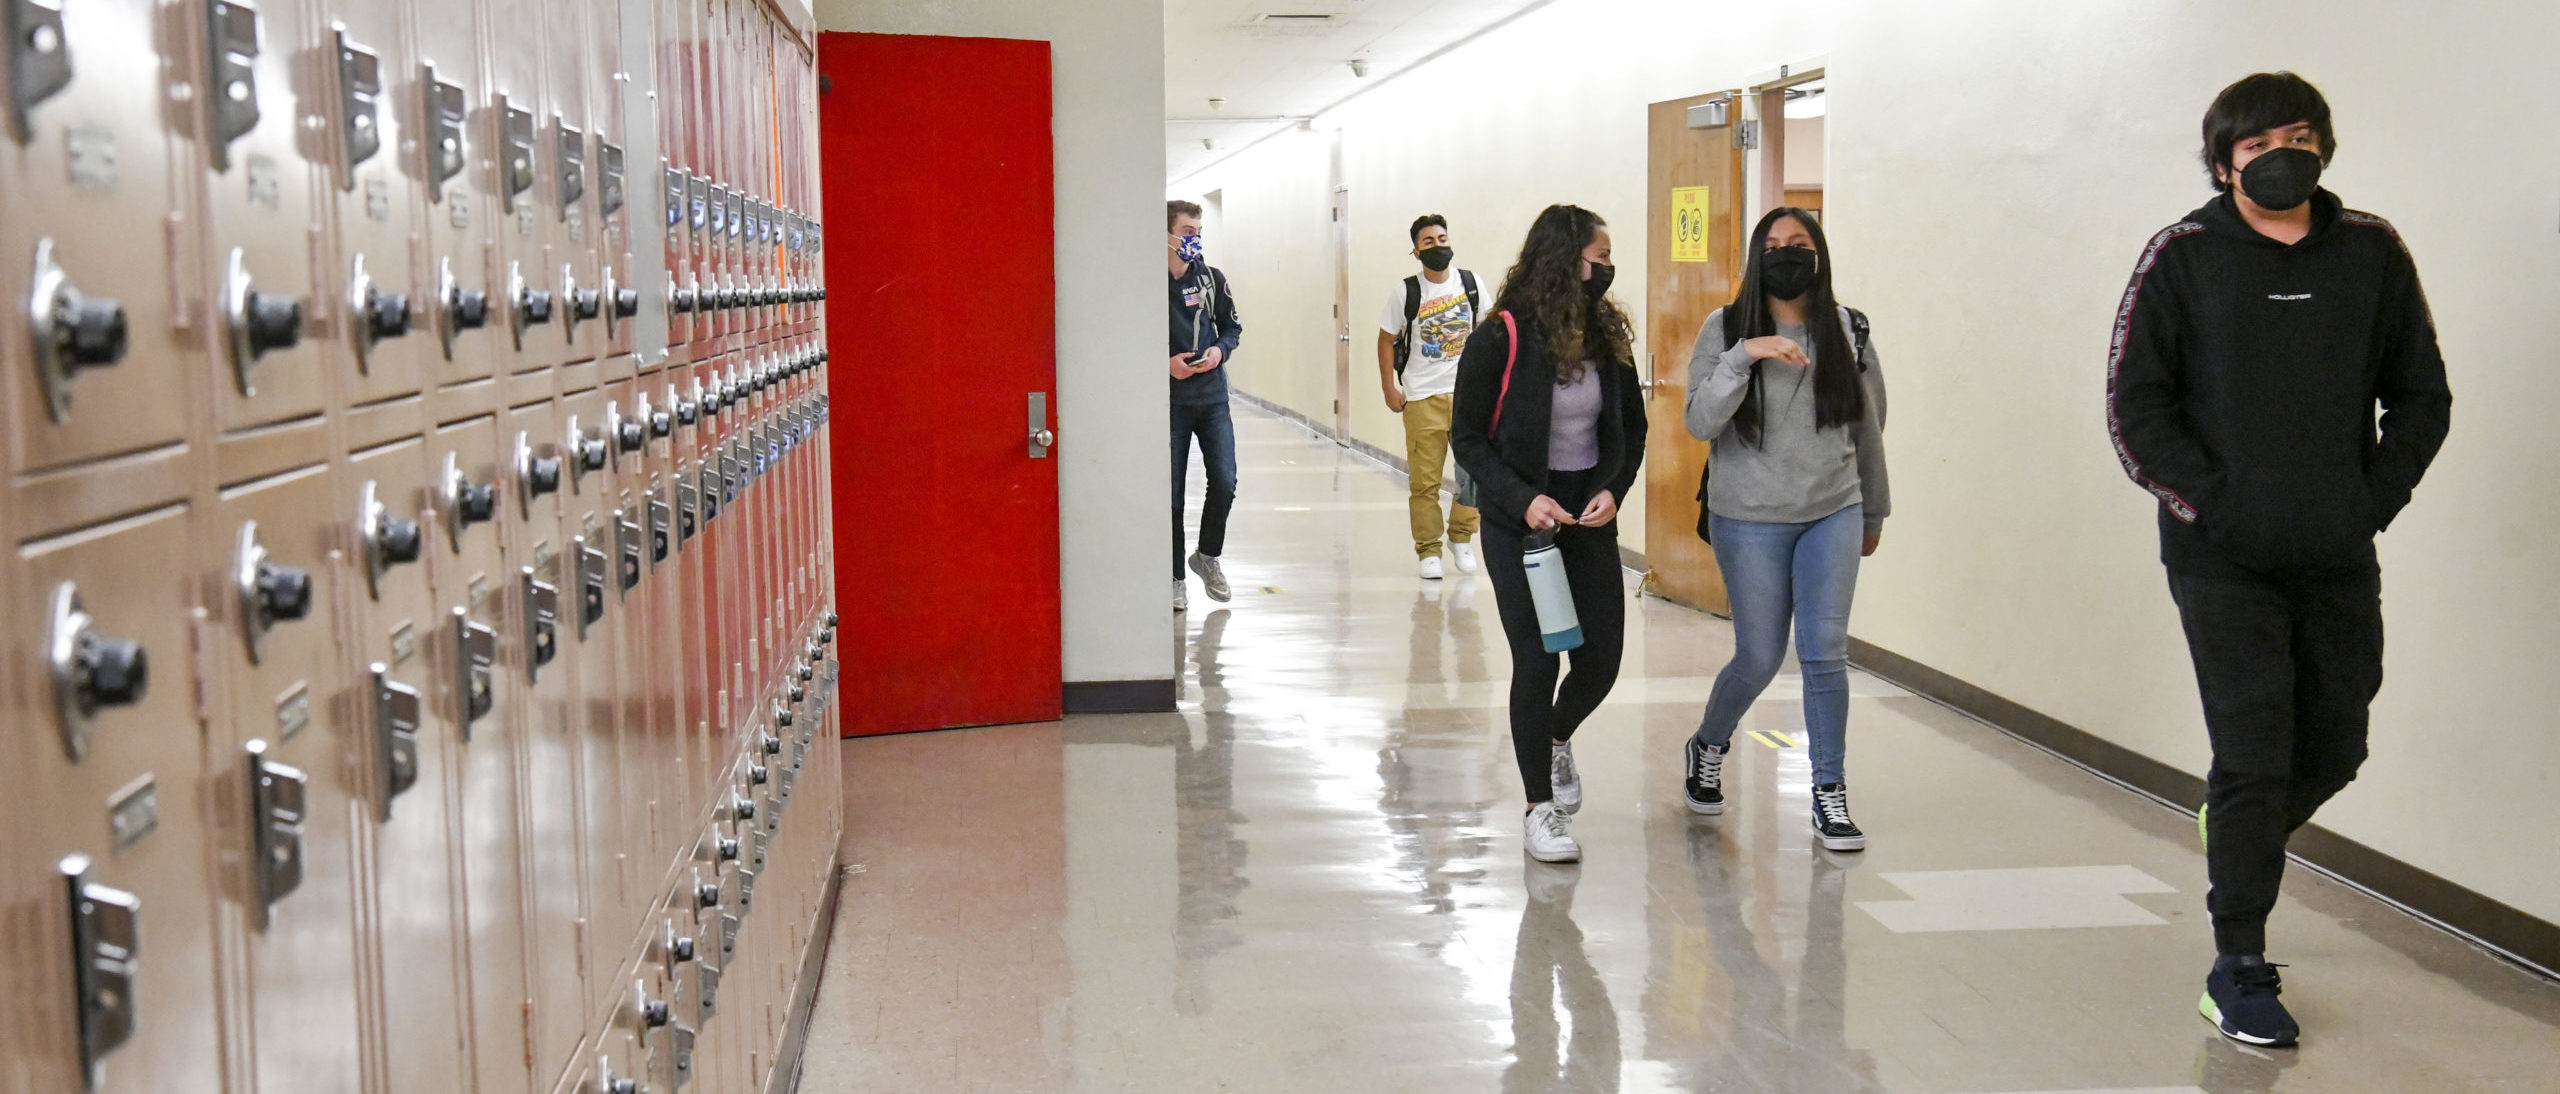 Returning students walk the hallway at Hollywood High School on April 27, 2021 in Los Angeles, California. Los Angeles Unified School District middle and high schools have reopened this week for in-person instruction. COVID-19 protocols in place include testing for all students and staff, vaccinations for all staff, and a completed daily health check for anyone arriving on campus (Photo by Rodin Eckenroth/Getty Images)